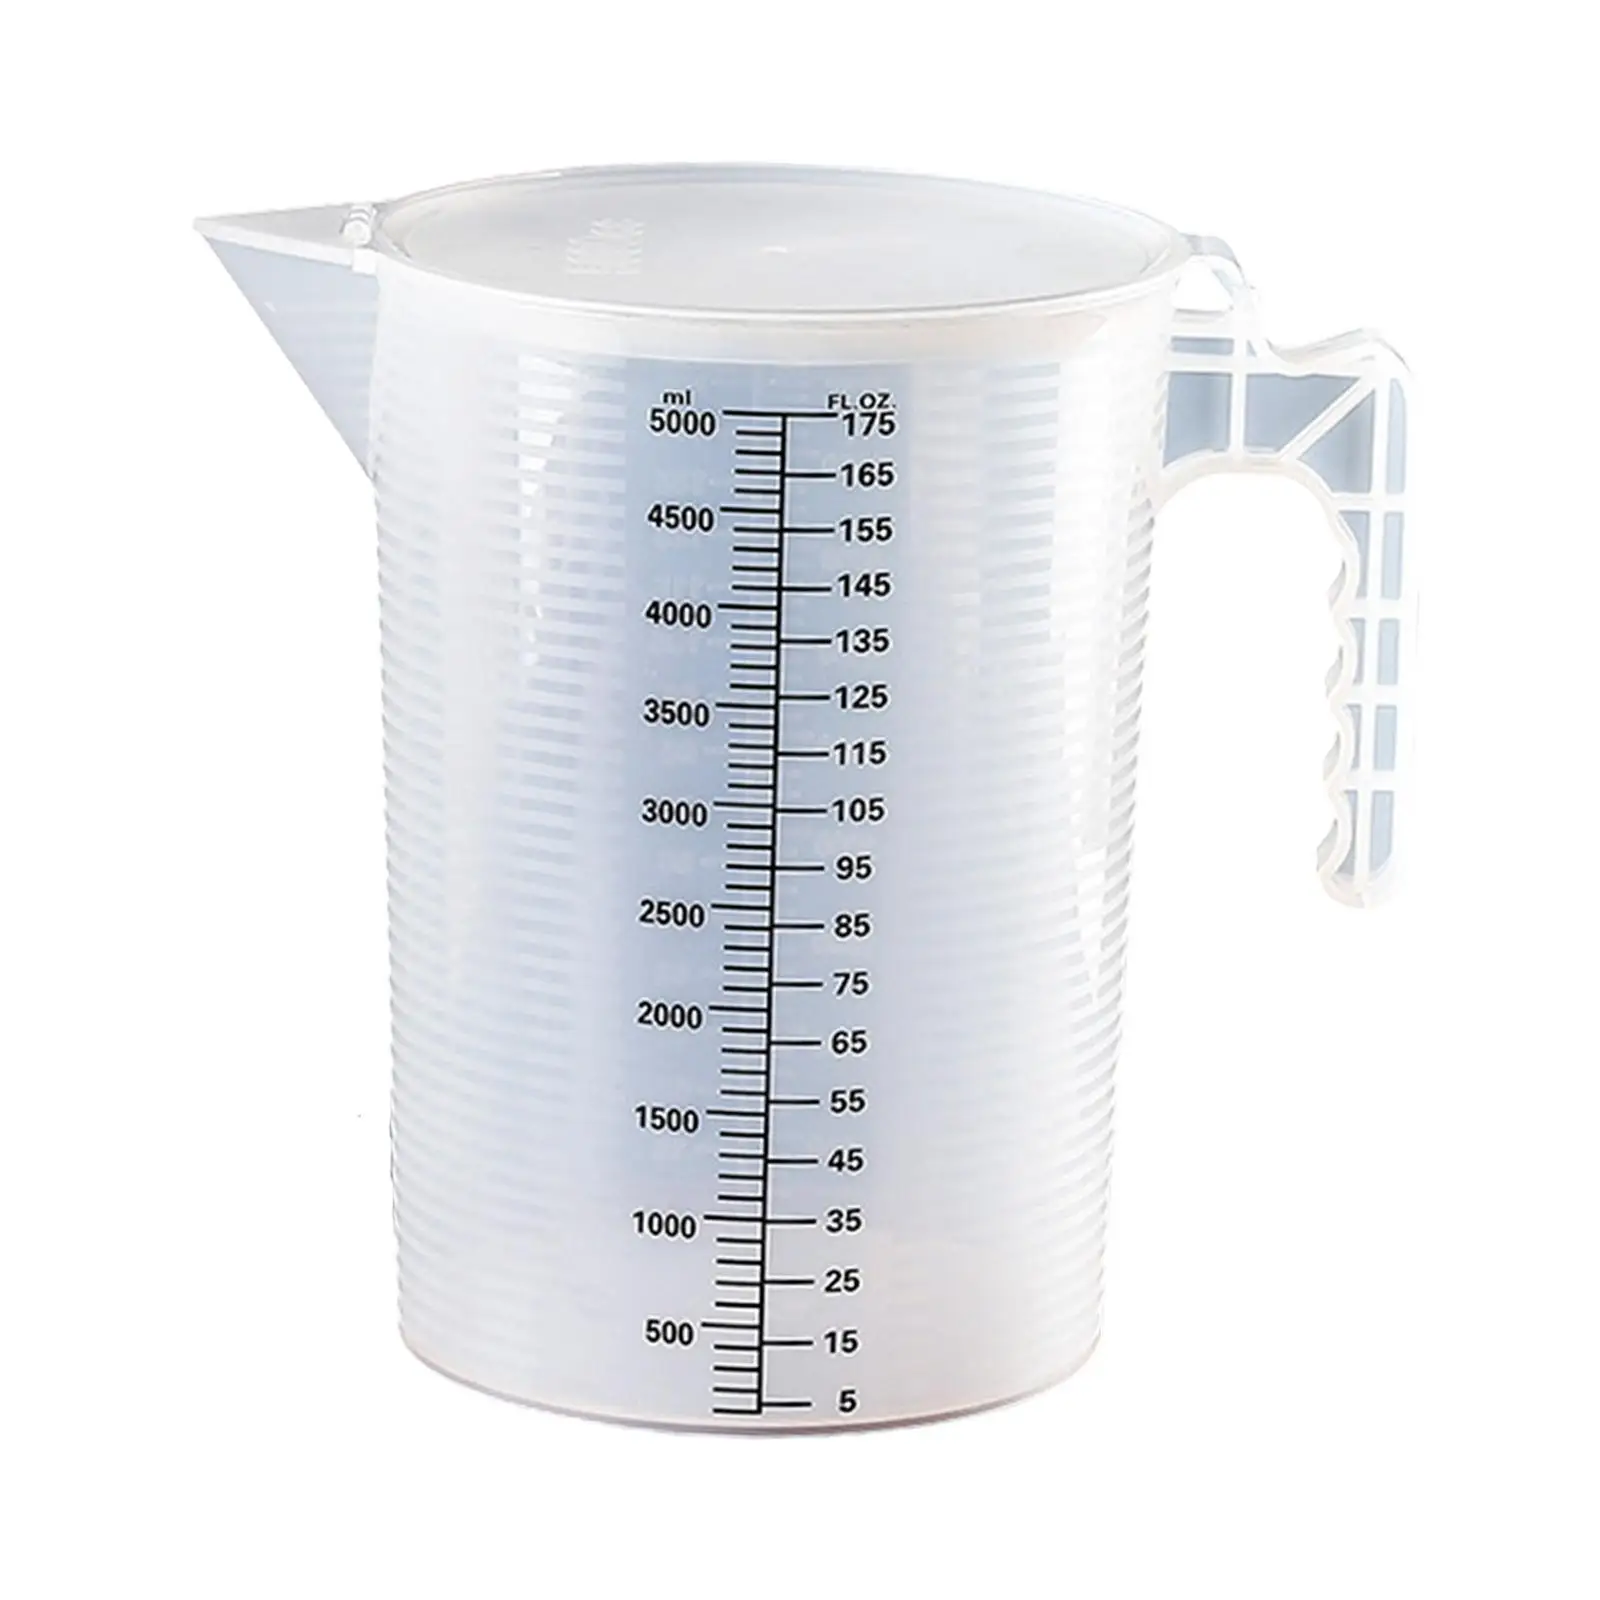 Plastic Water Pitcher 5000ml Clear Measuring Cup for Tea Bedside Restaurant